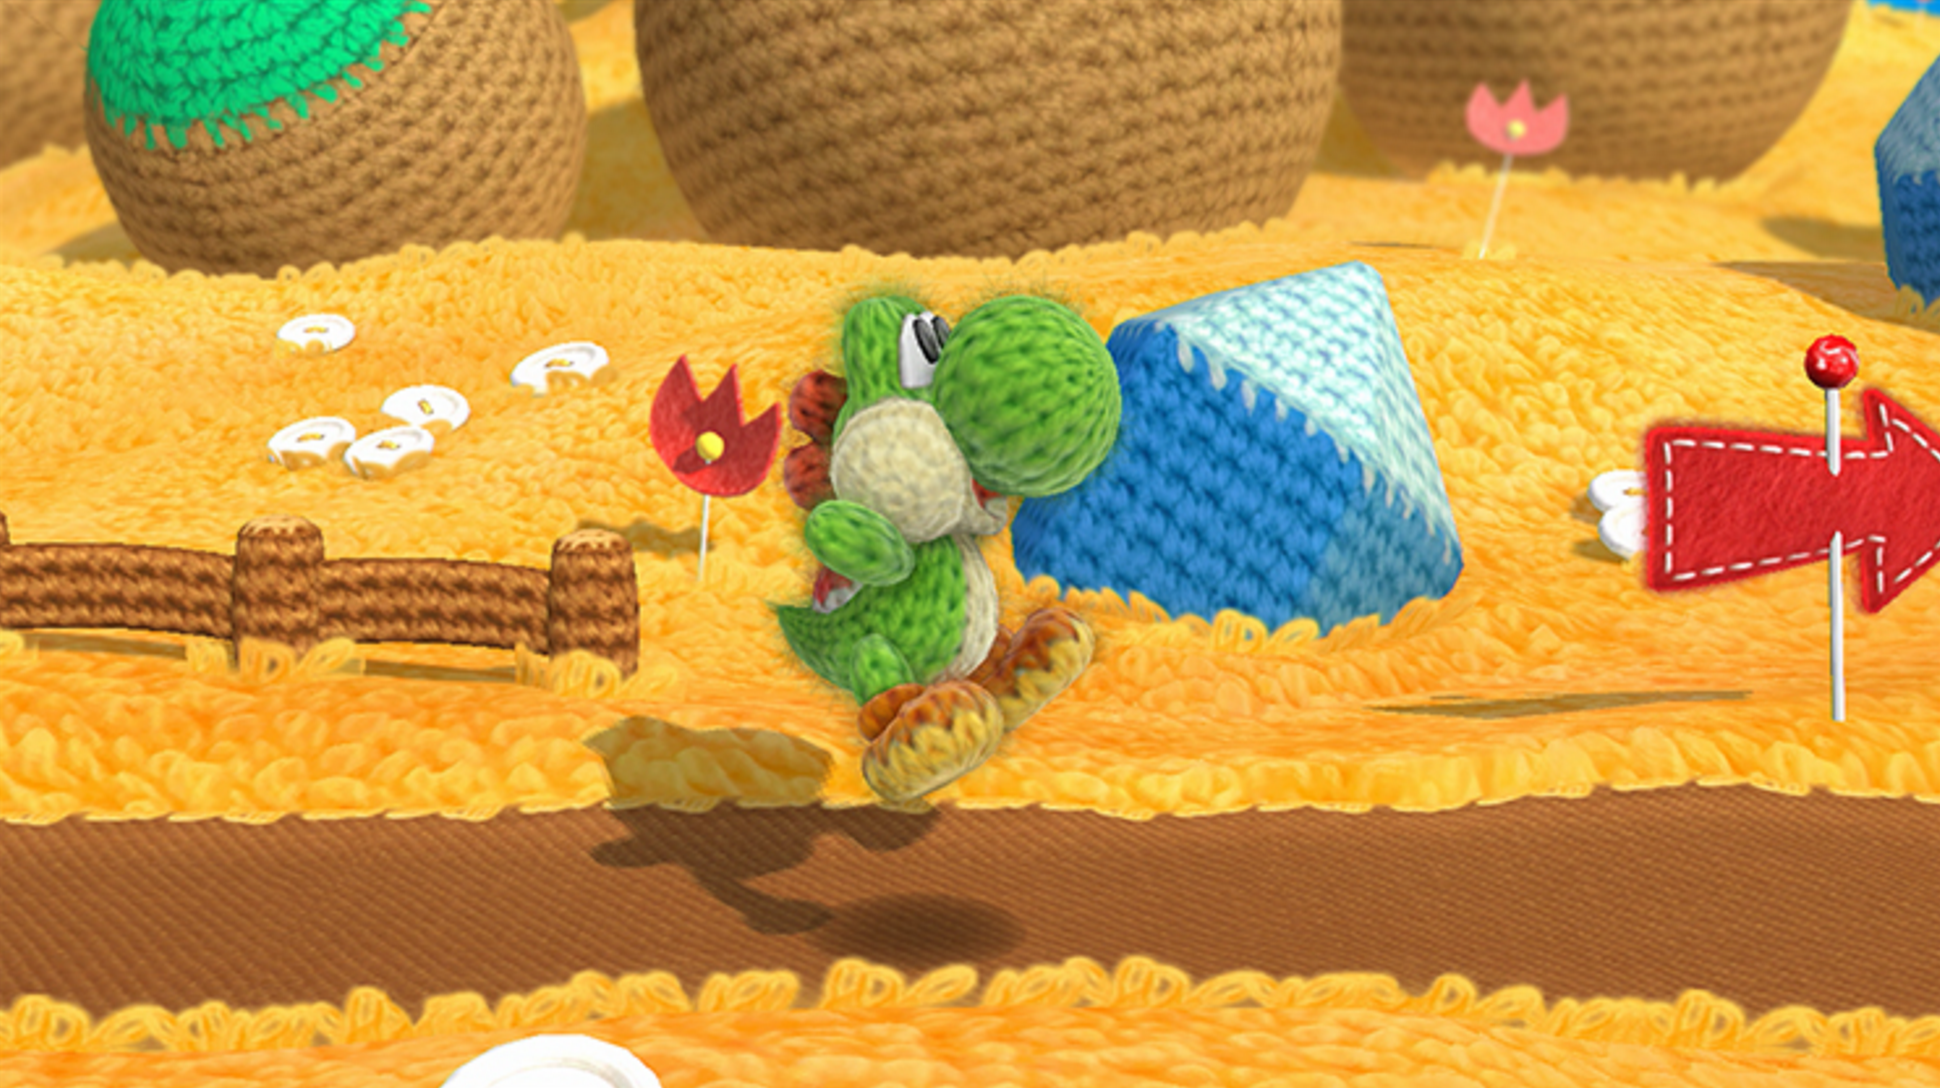 Yoshi's Woolly World saw the iconic dinosaur recreated on yarn, and that handcrafted aesthetic made its debut in Super Mario World 2.